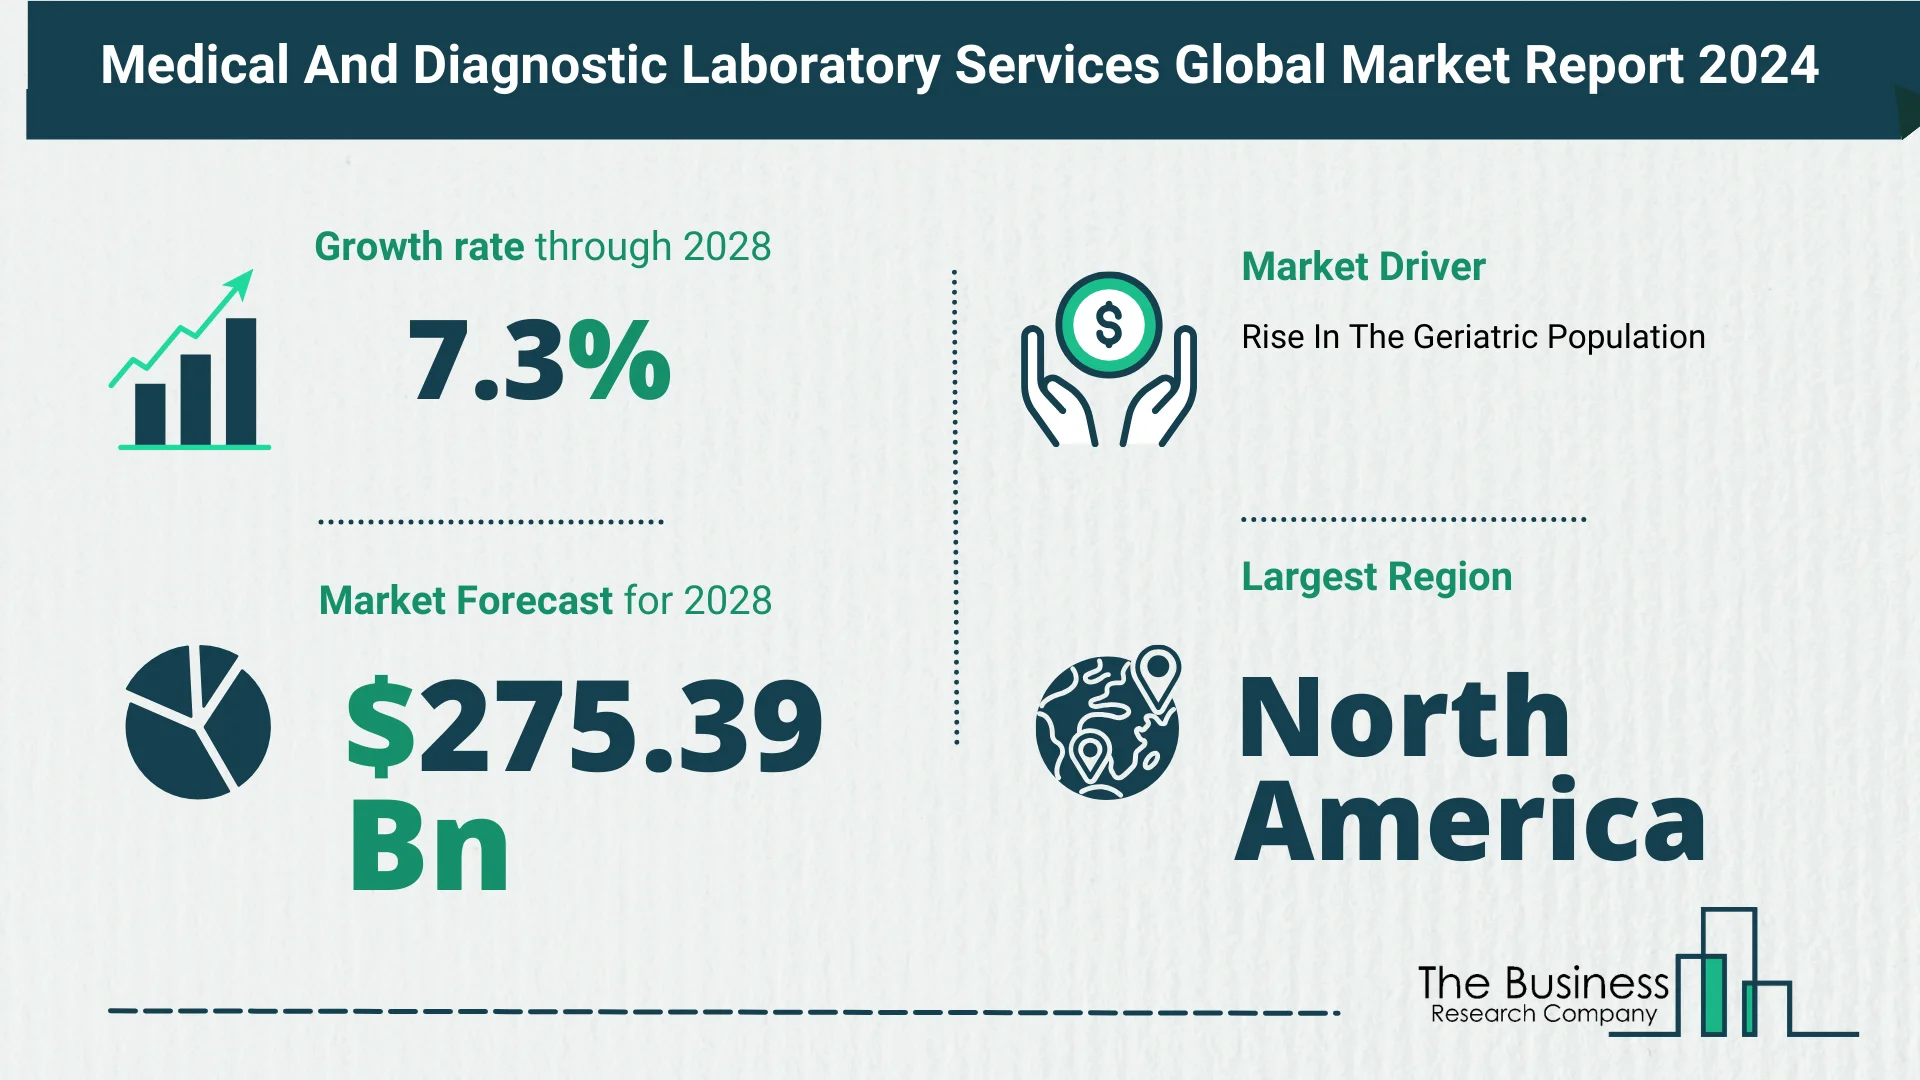 Global Medical And Diagnostic Laboratory Services Market